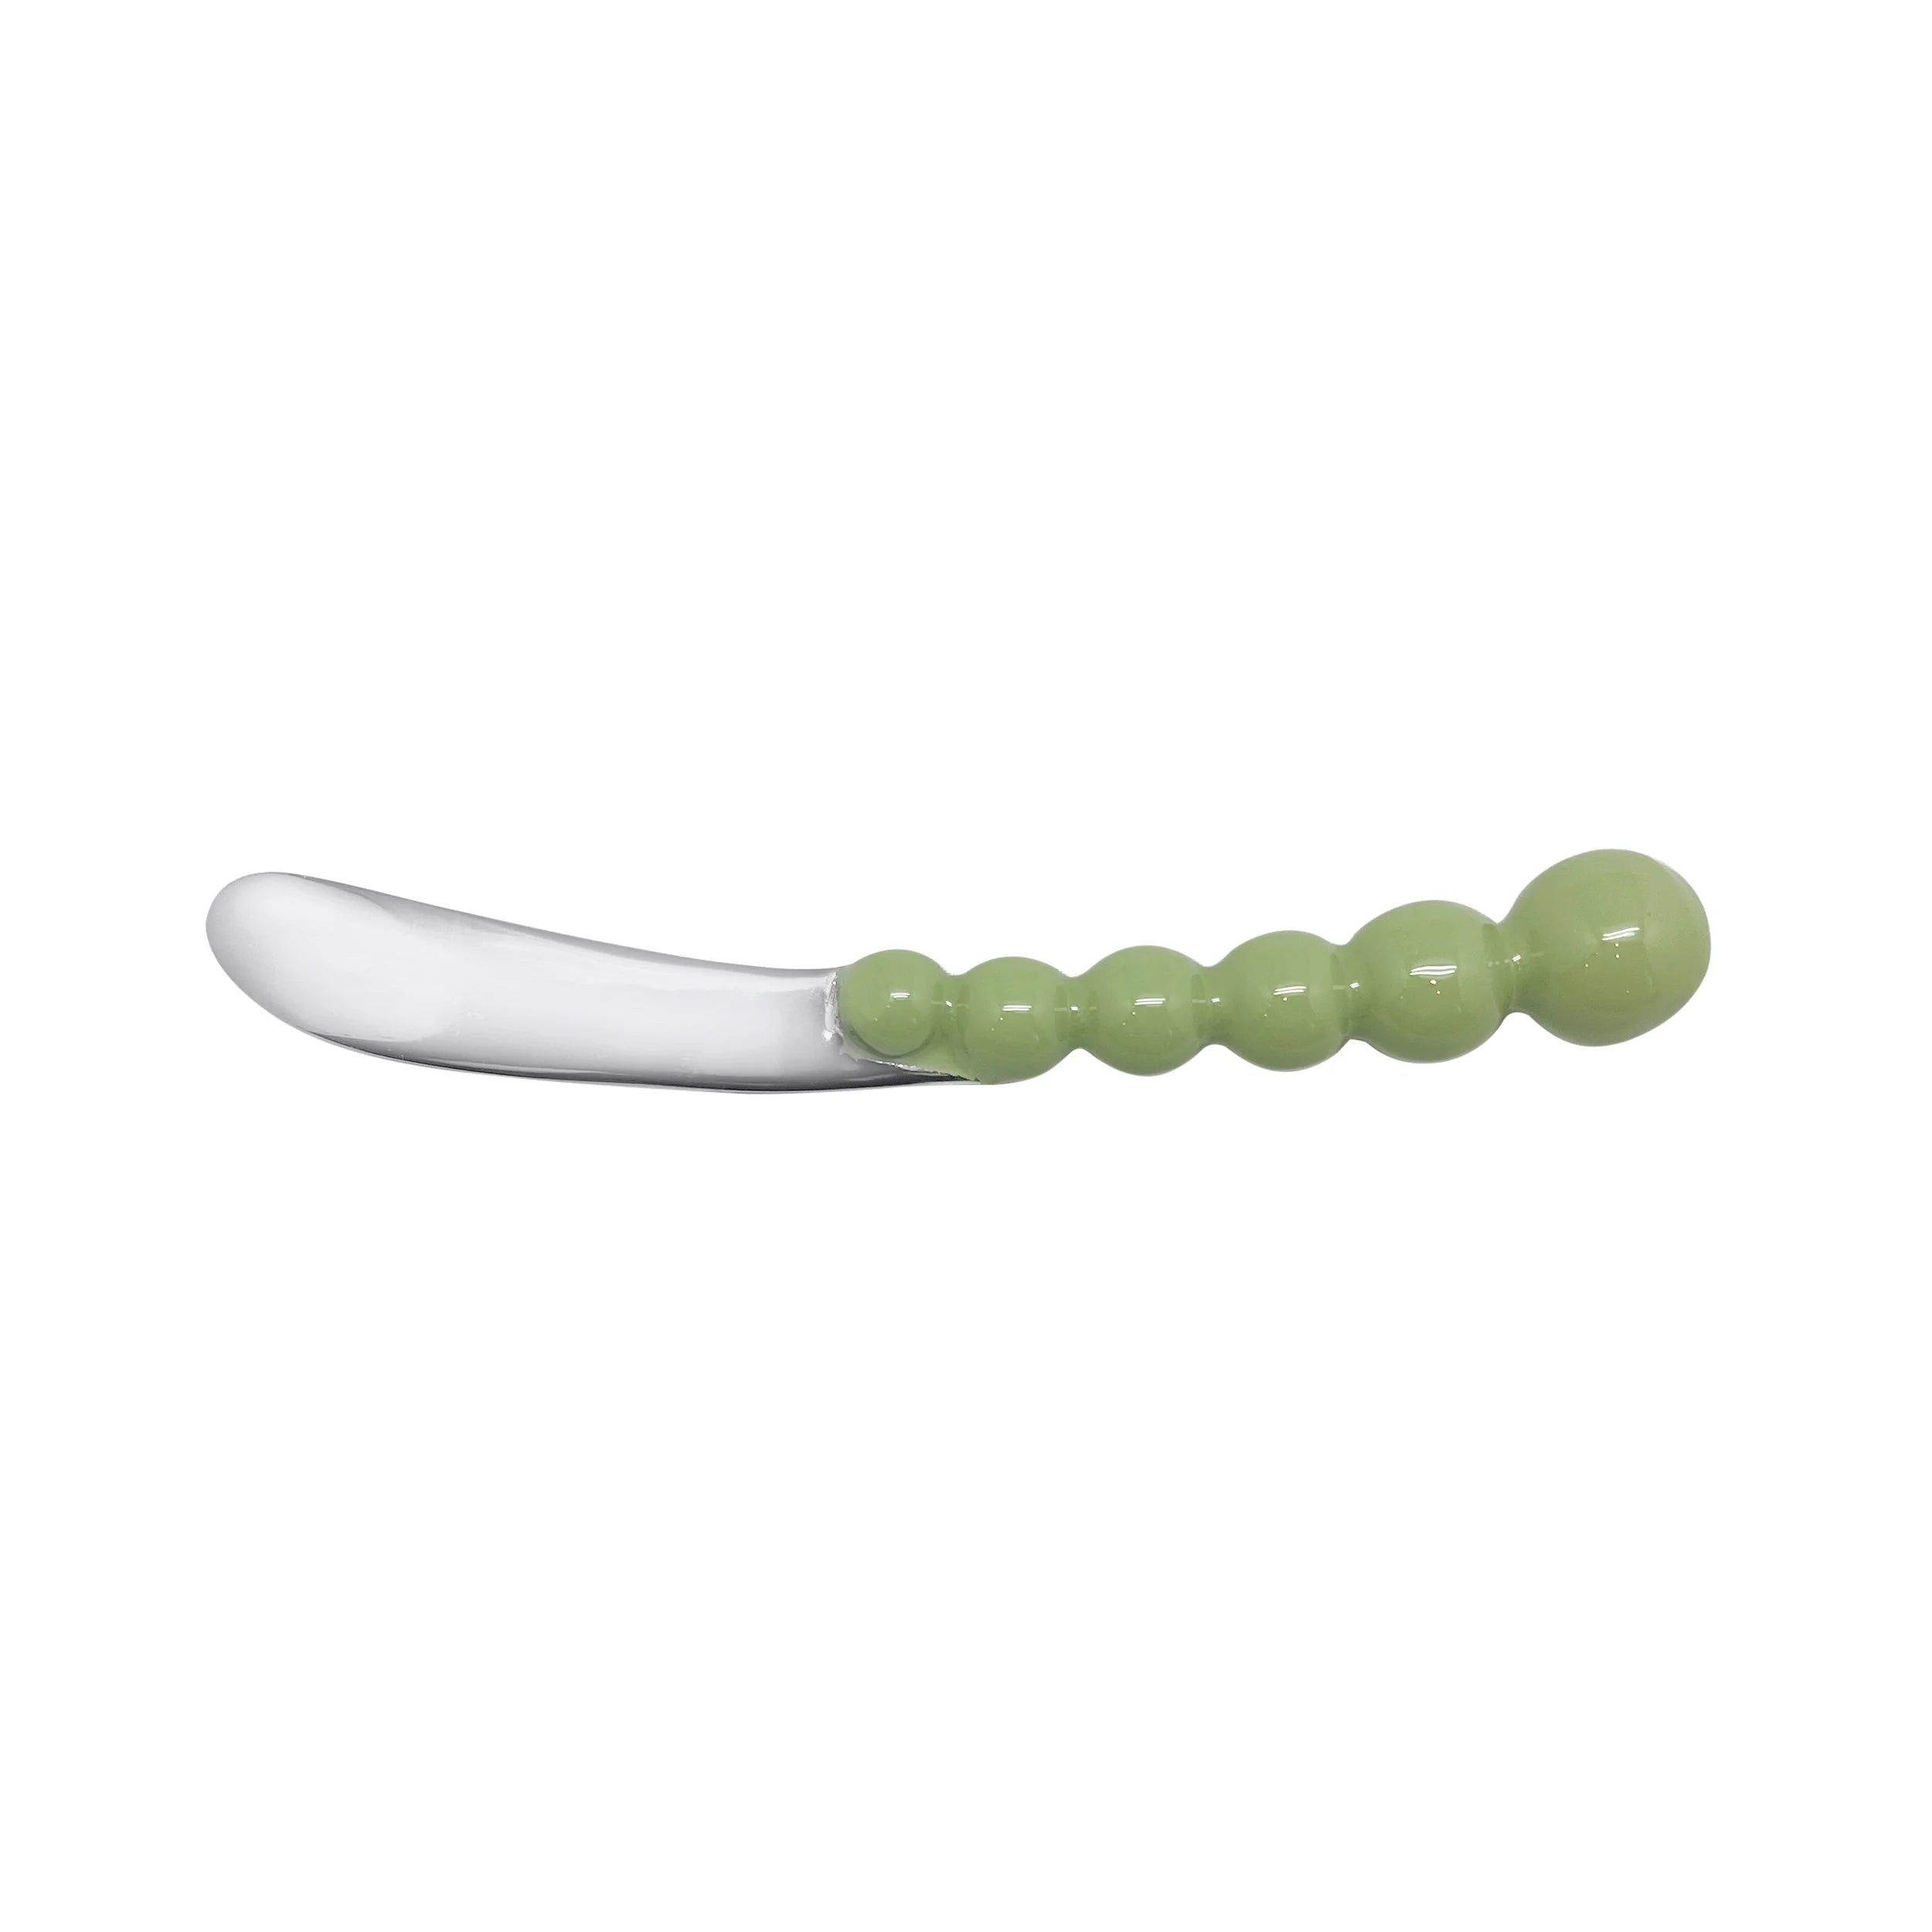 Mariposa Pearled Spreader - 5 Colors